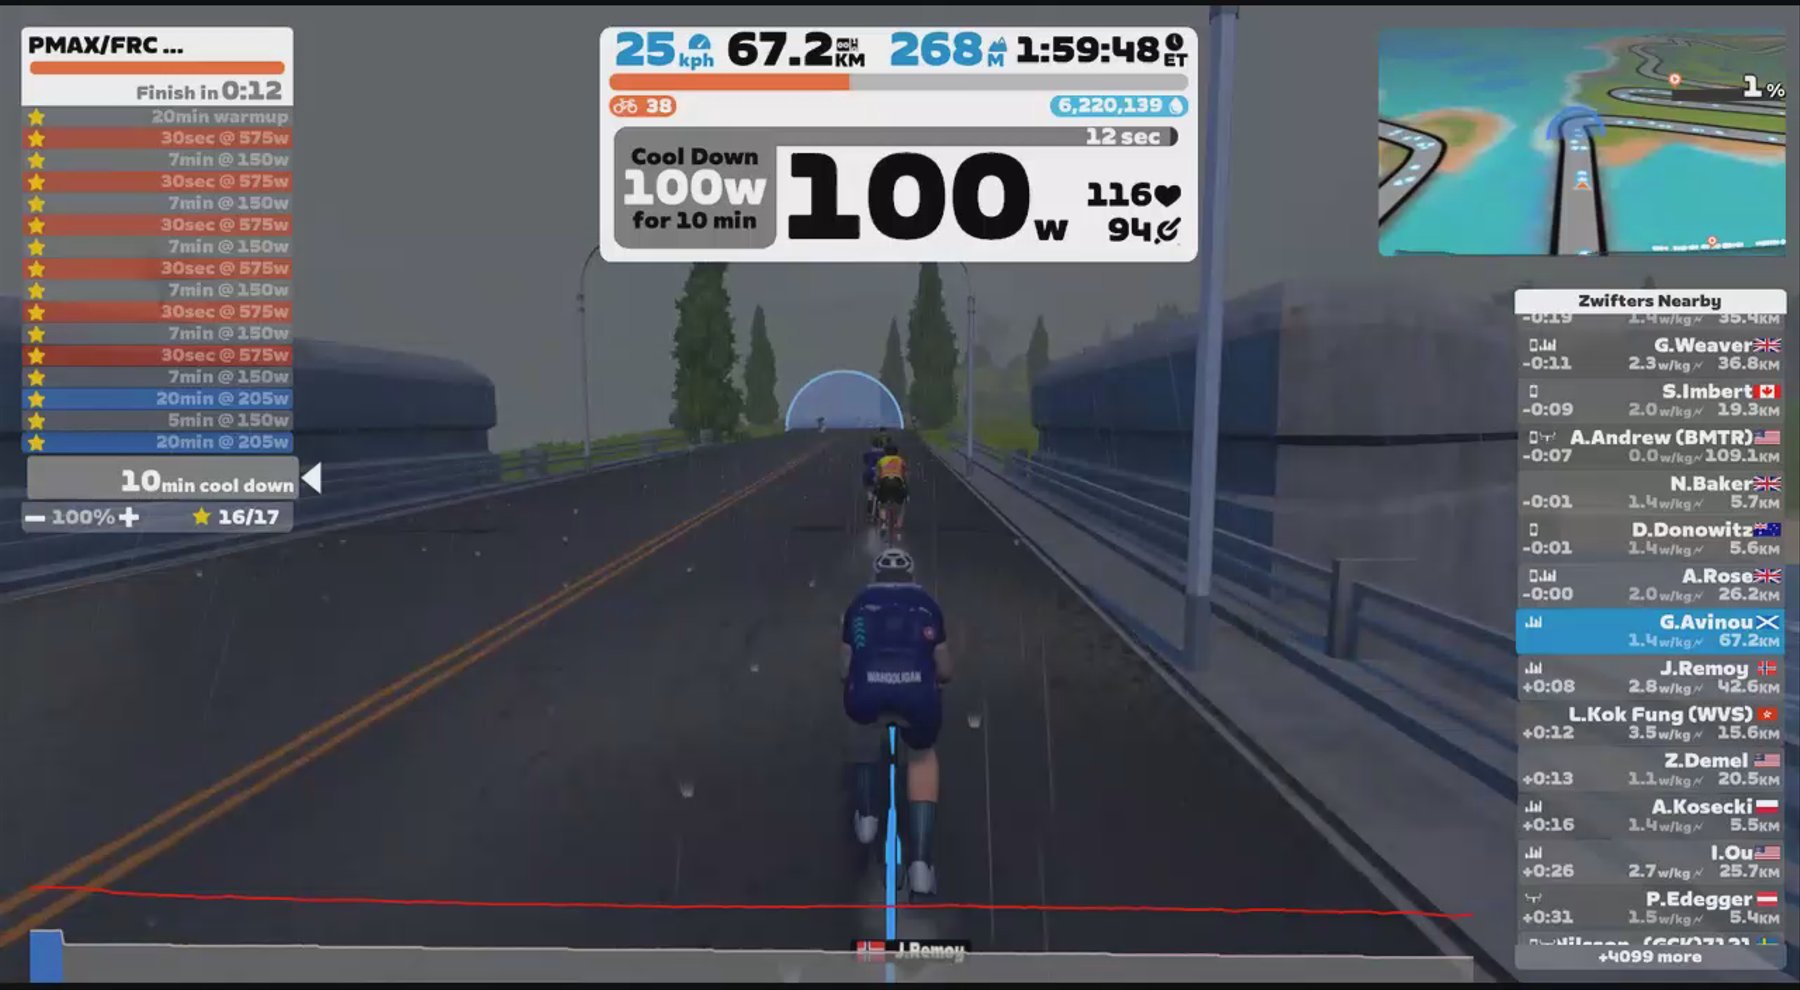 Zwift - PMAX/FRC Intensive Anaerobic in Watopia